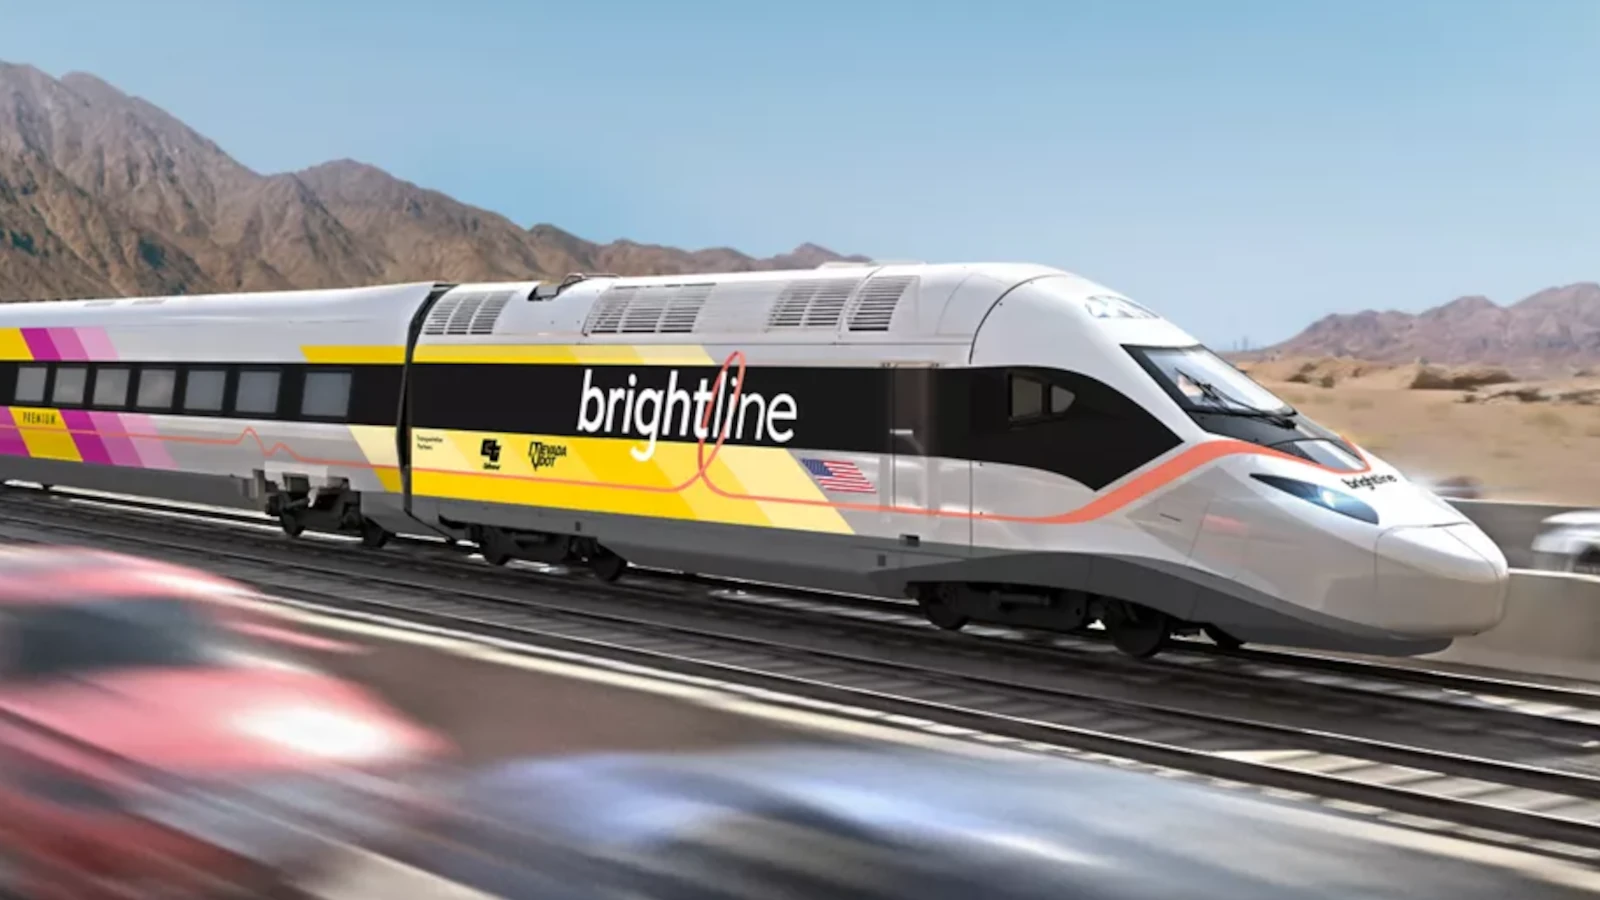 Massive Update As Los Angeles to Las Vegas High-Speed Rail Line Construction Commenced